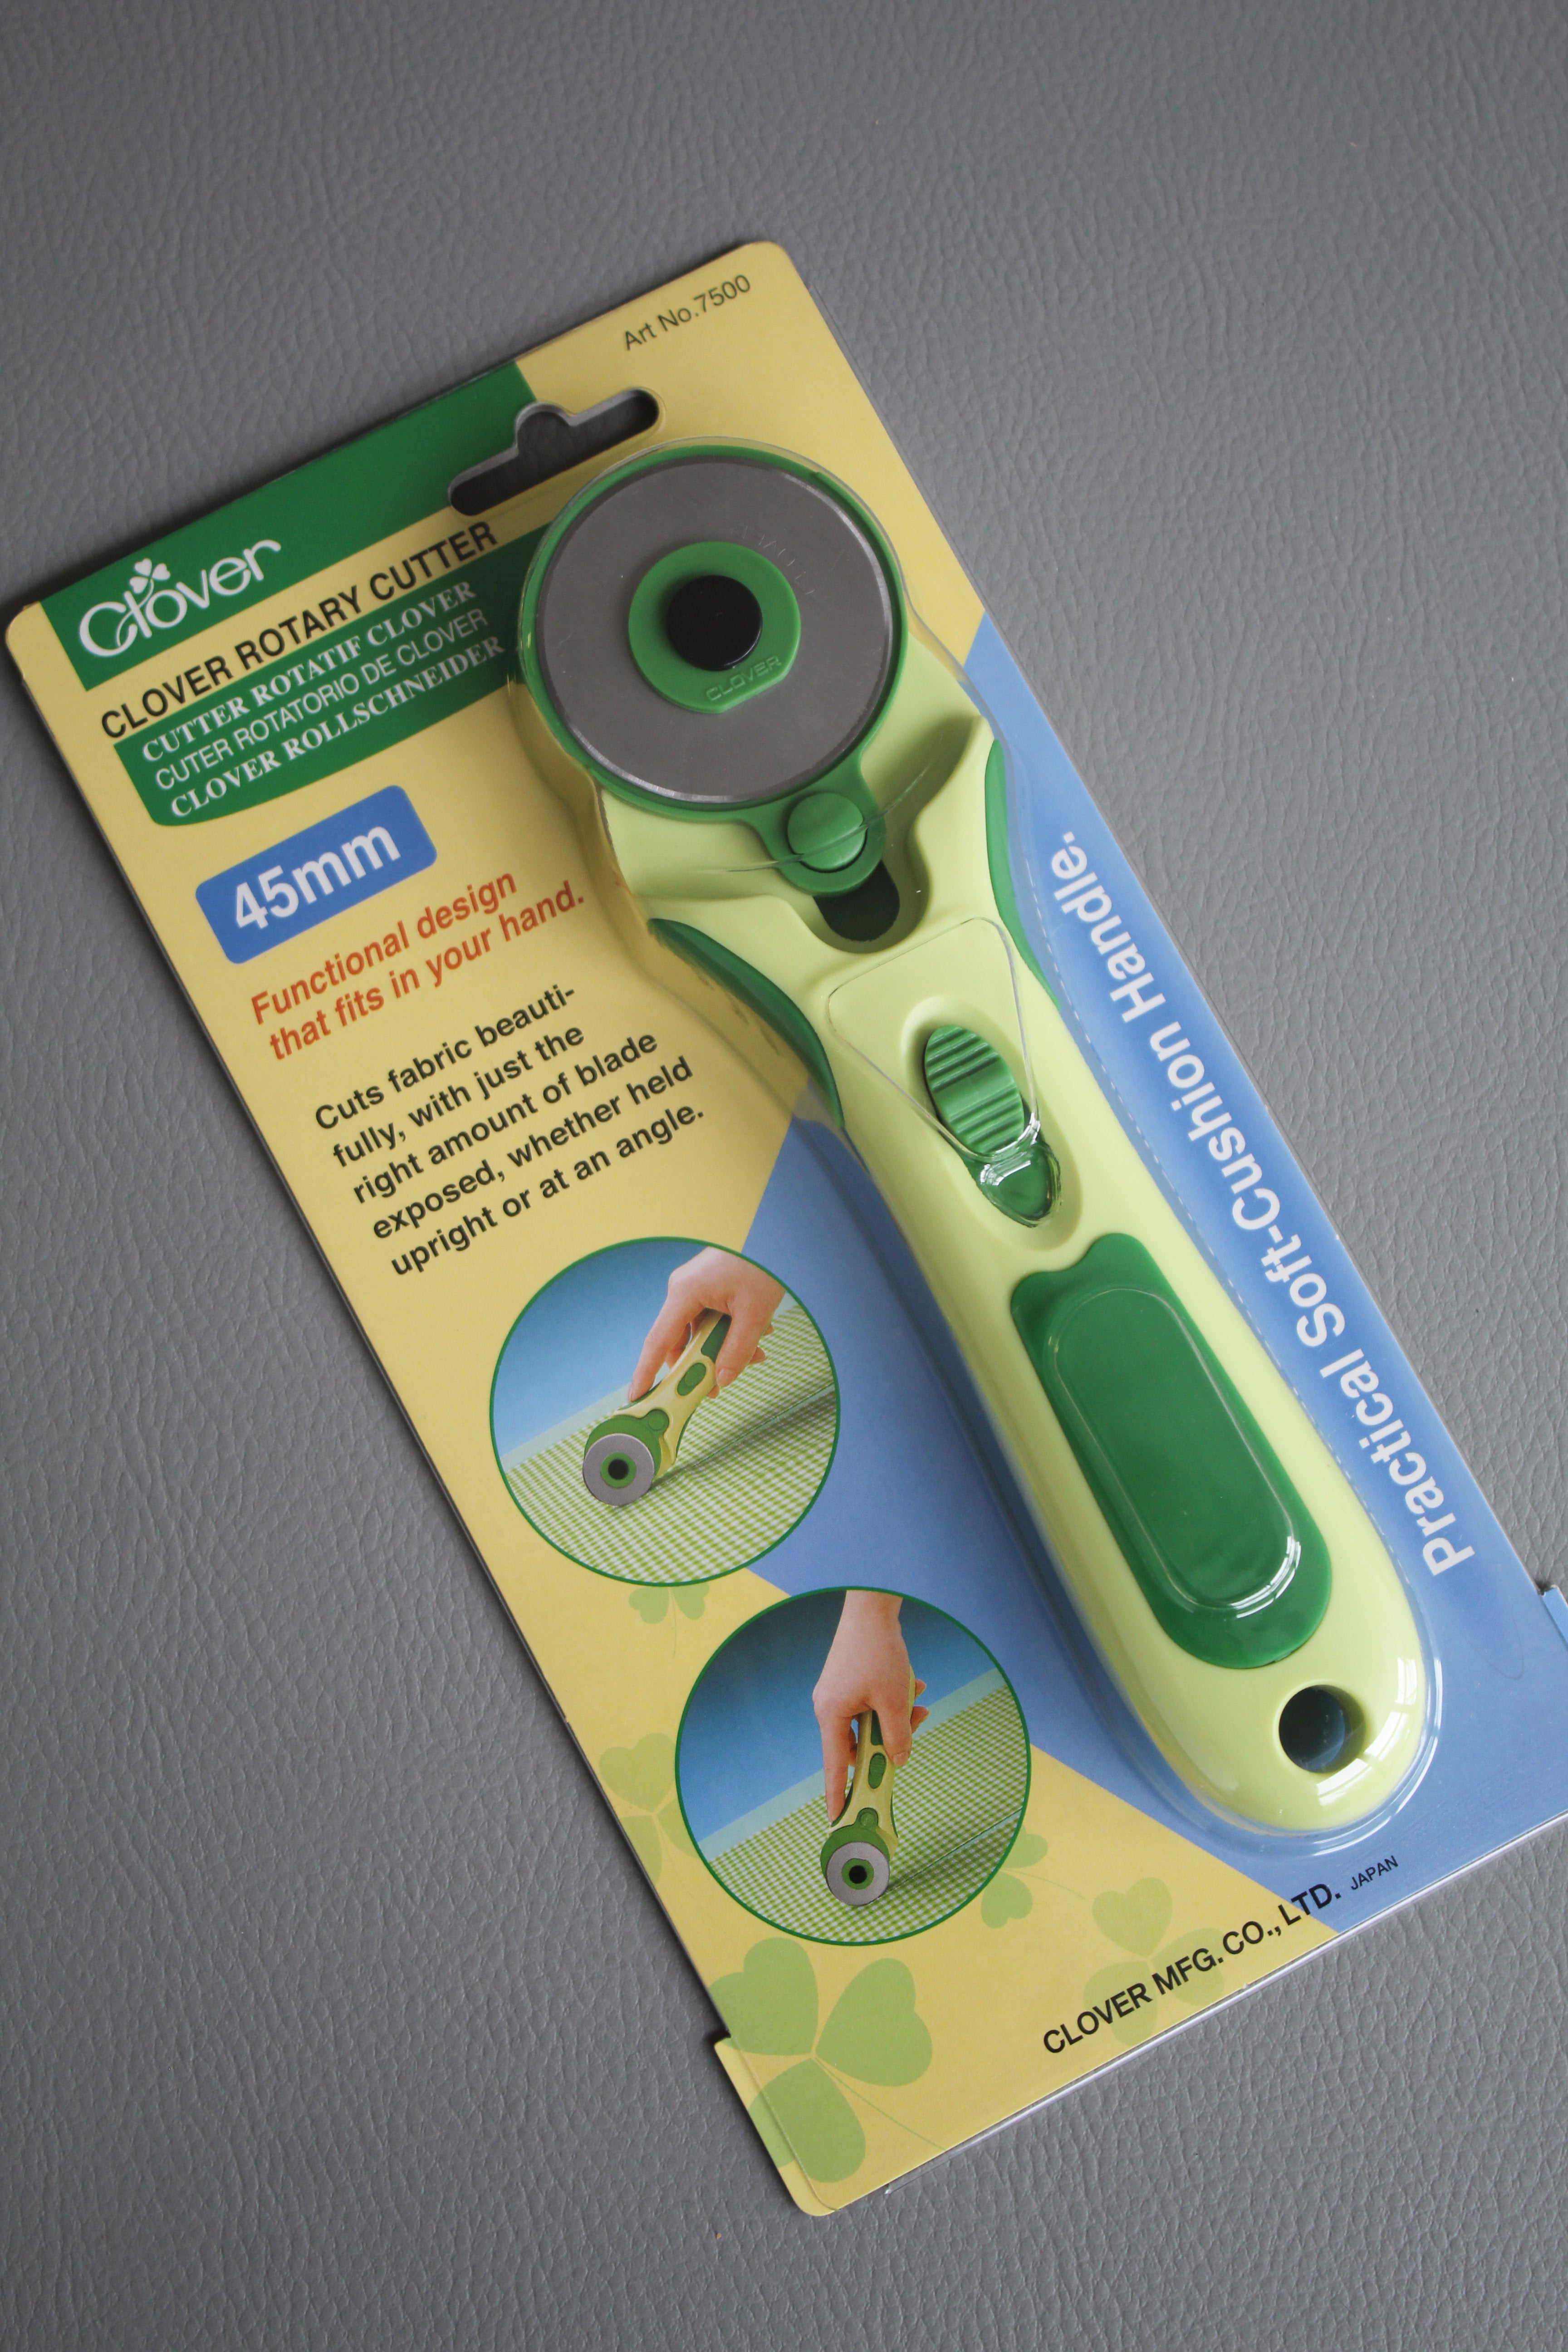 MJTrends: Clover 45mm Rotary Pinking Blade